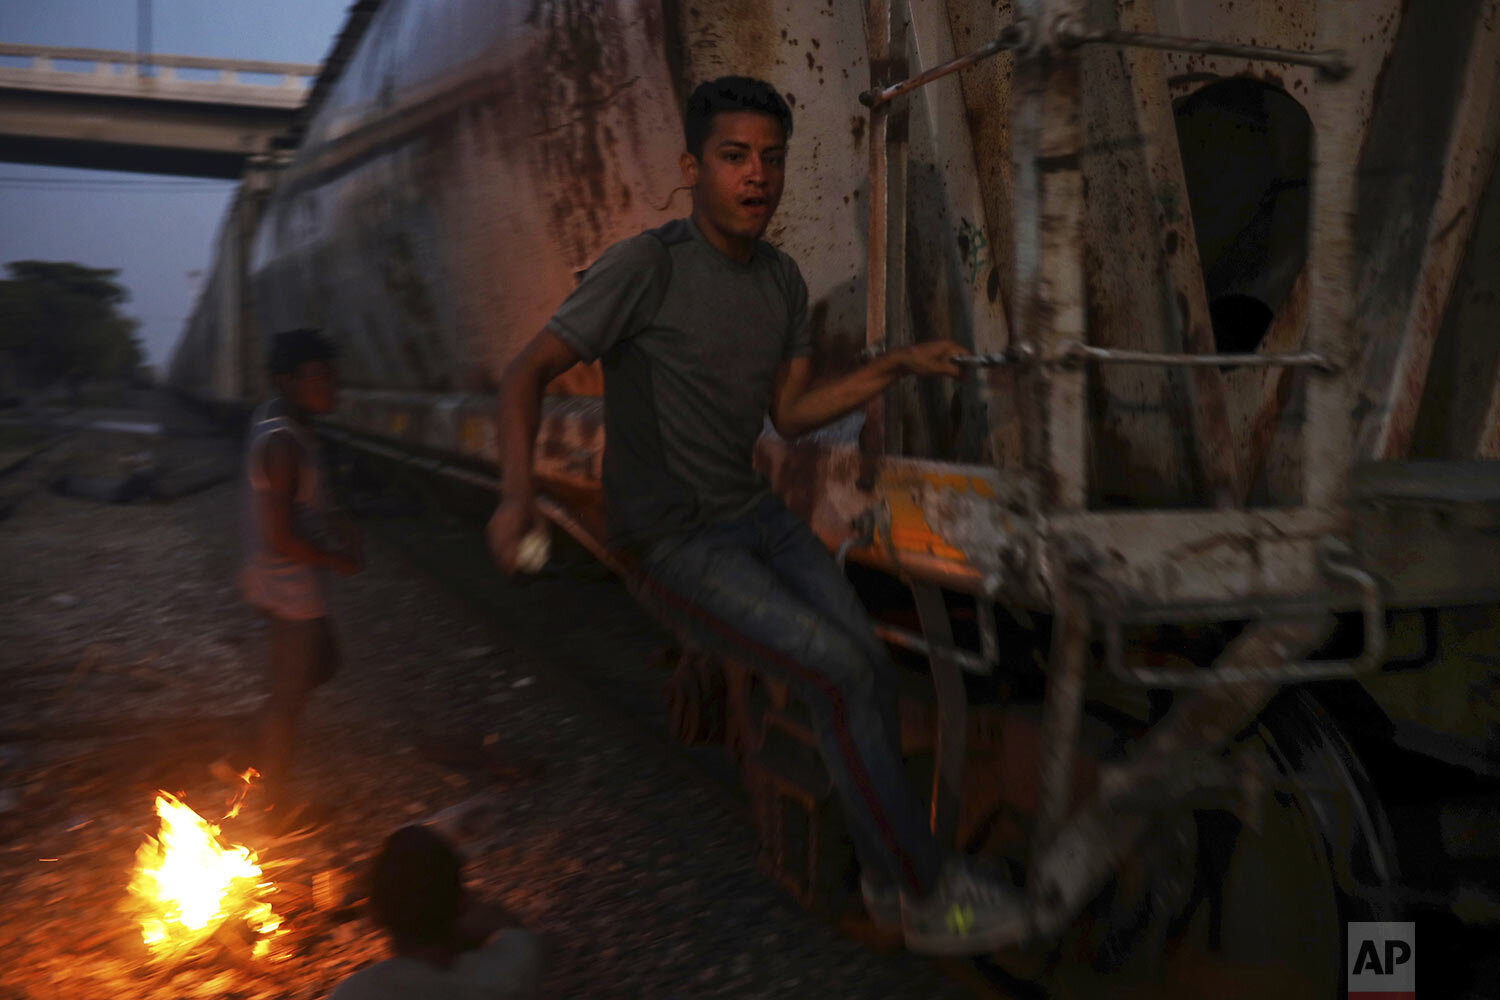  In this Nov. 21, 2019 photo, a Central American migrant climbs on a railroad car during his journey north, in Coatzacoalcos, Veracruz state, Mexico. (AP Photo/Felix Marquez) 